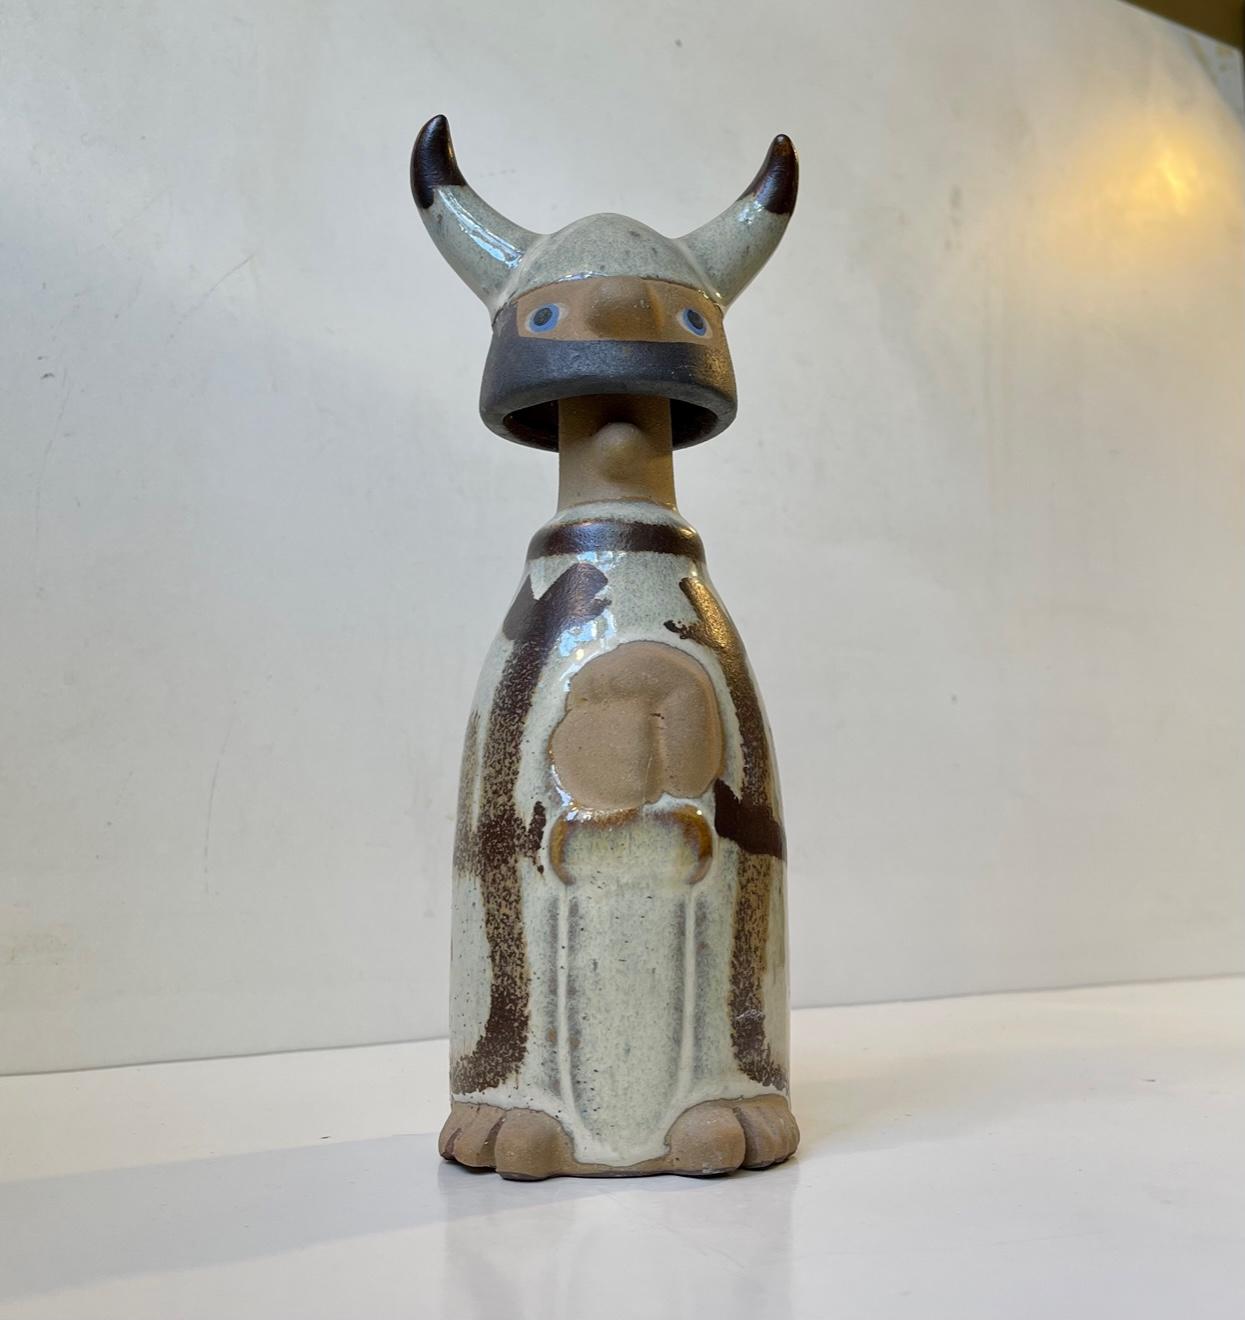 A Lisa Larson inspired viking sculpture/figurine in hand-glazed studio ceramic. Unknown Scandinavian designer/maker circa 1970. It has no markings but suspect it was made by either Knabstrup or Søholm in Denmark. Measurements: H: 23.5 cm, W: 9 cm,